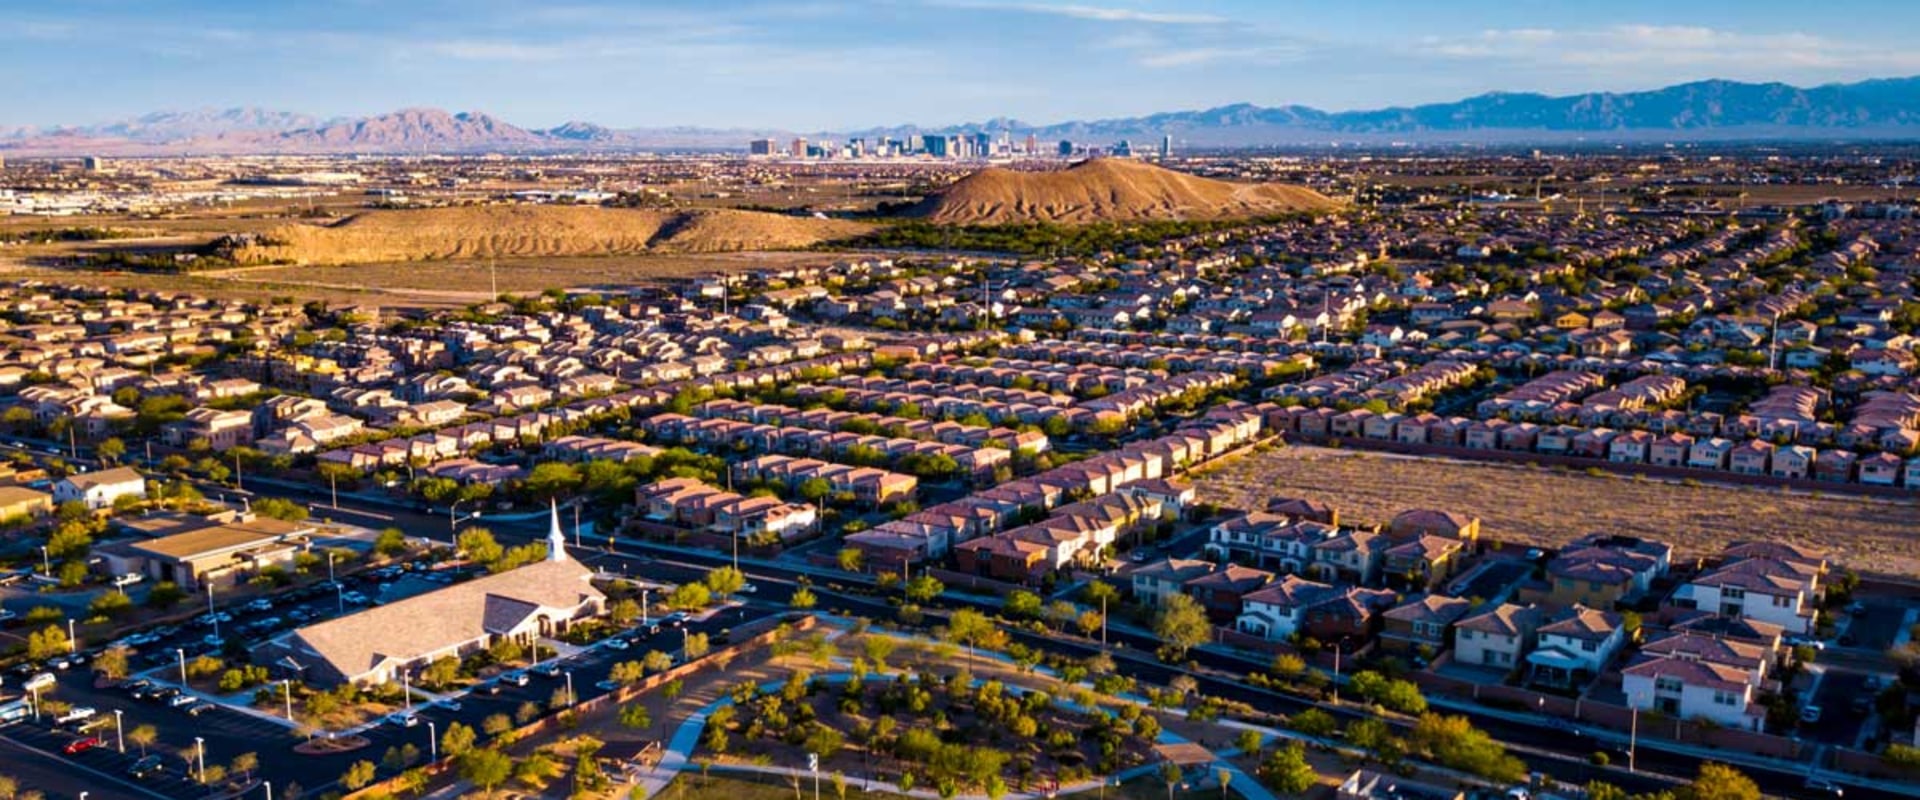 Affordable Neighborhoods in Las Vegas: A Local Expert's Guide